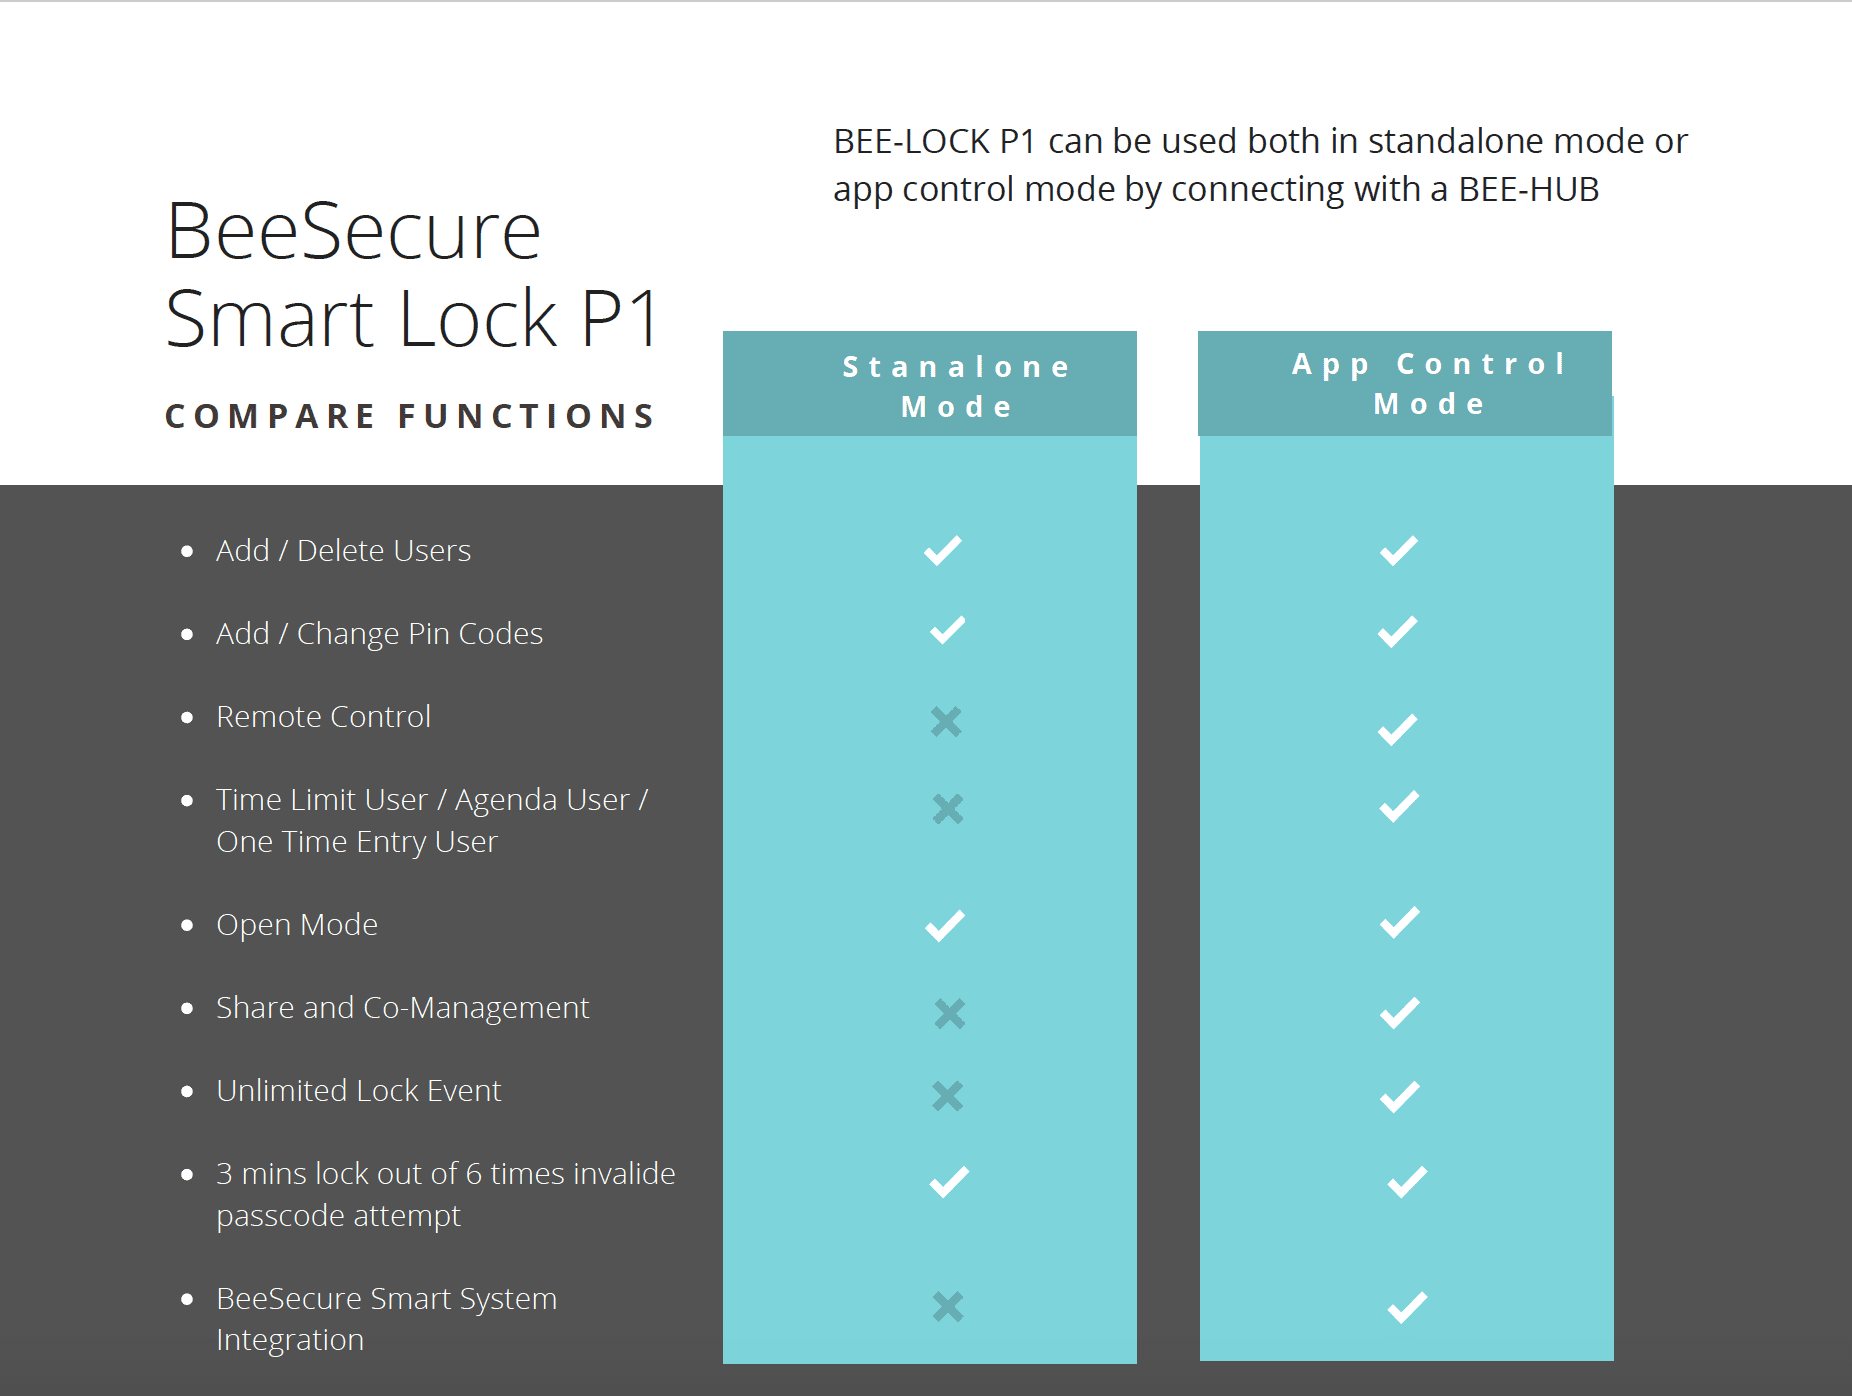 BeeSecure smart lock P1, comparison of standalone mode and App control mode